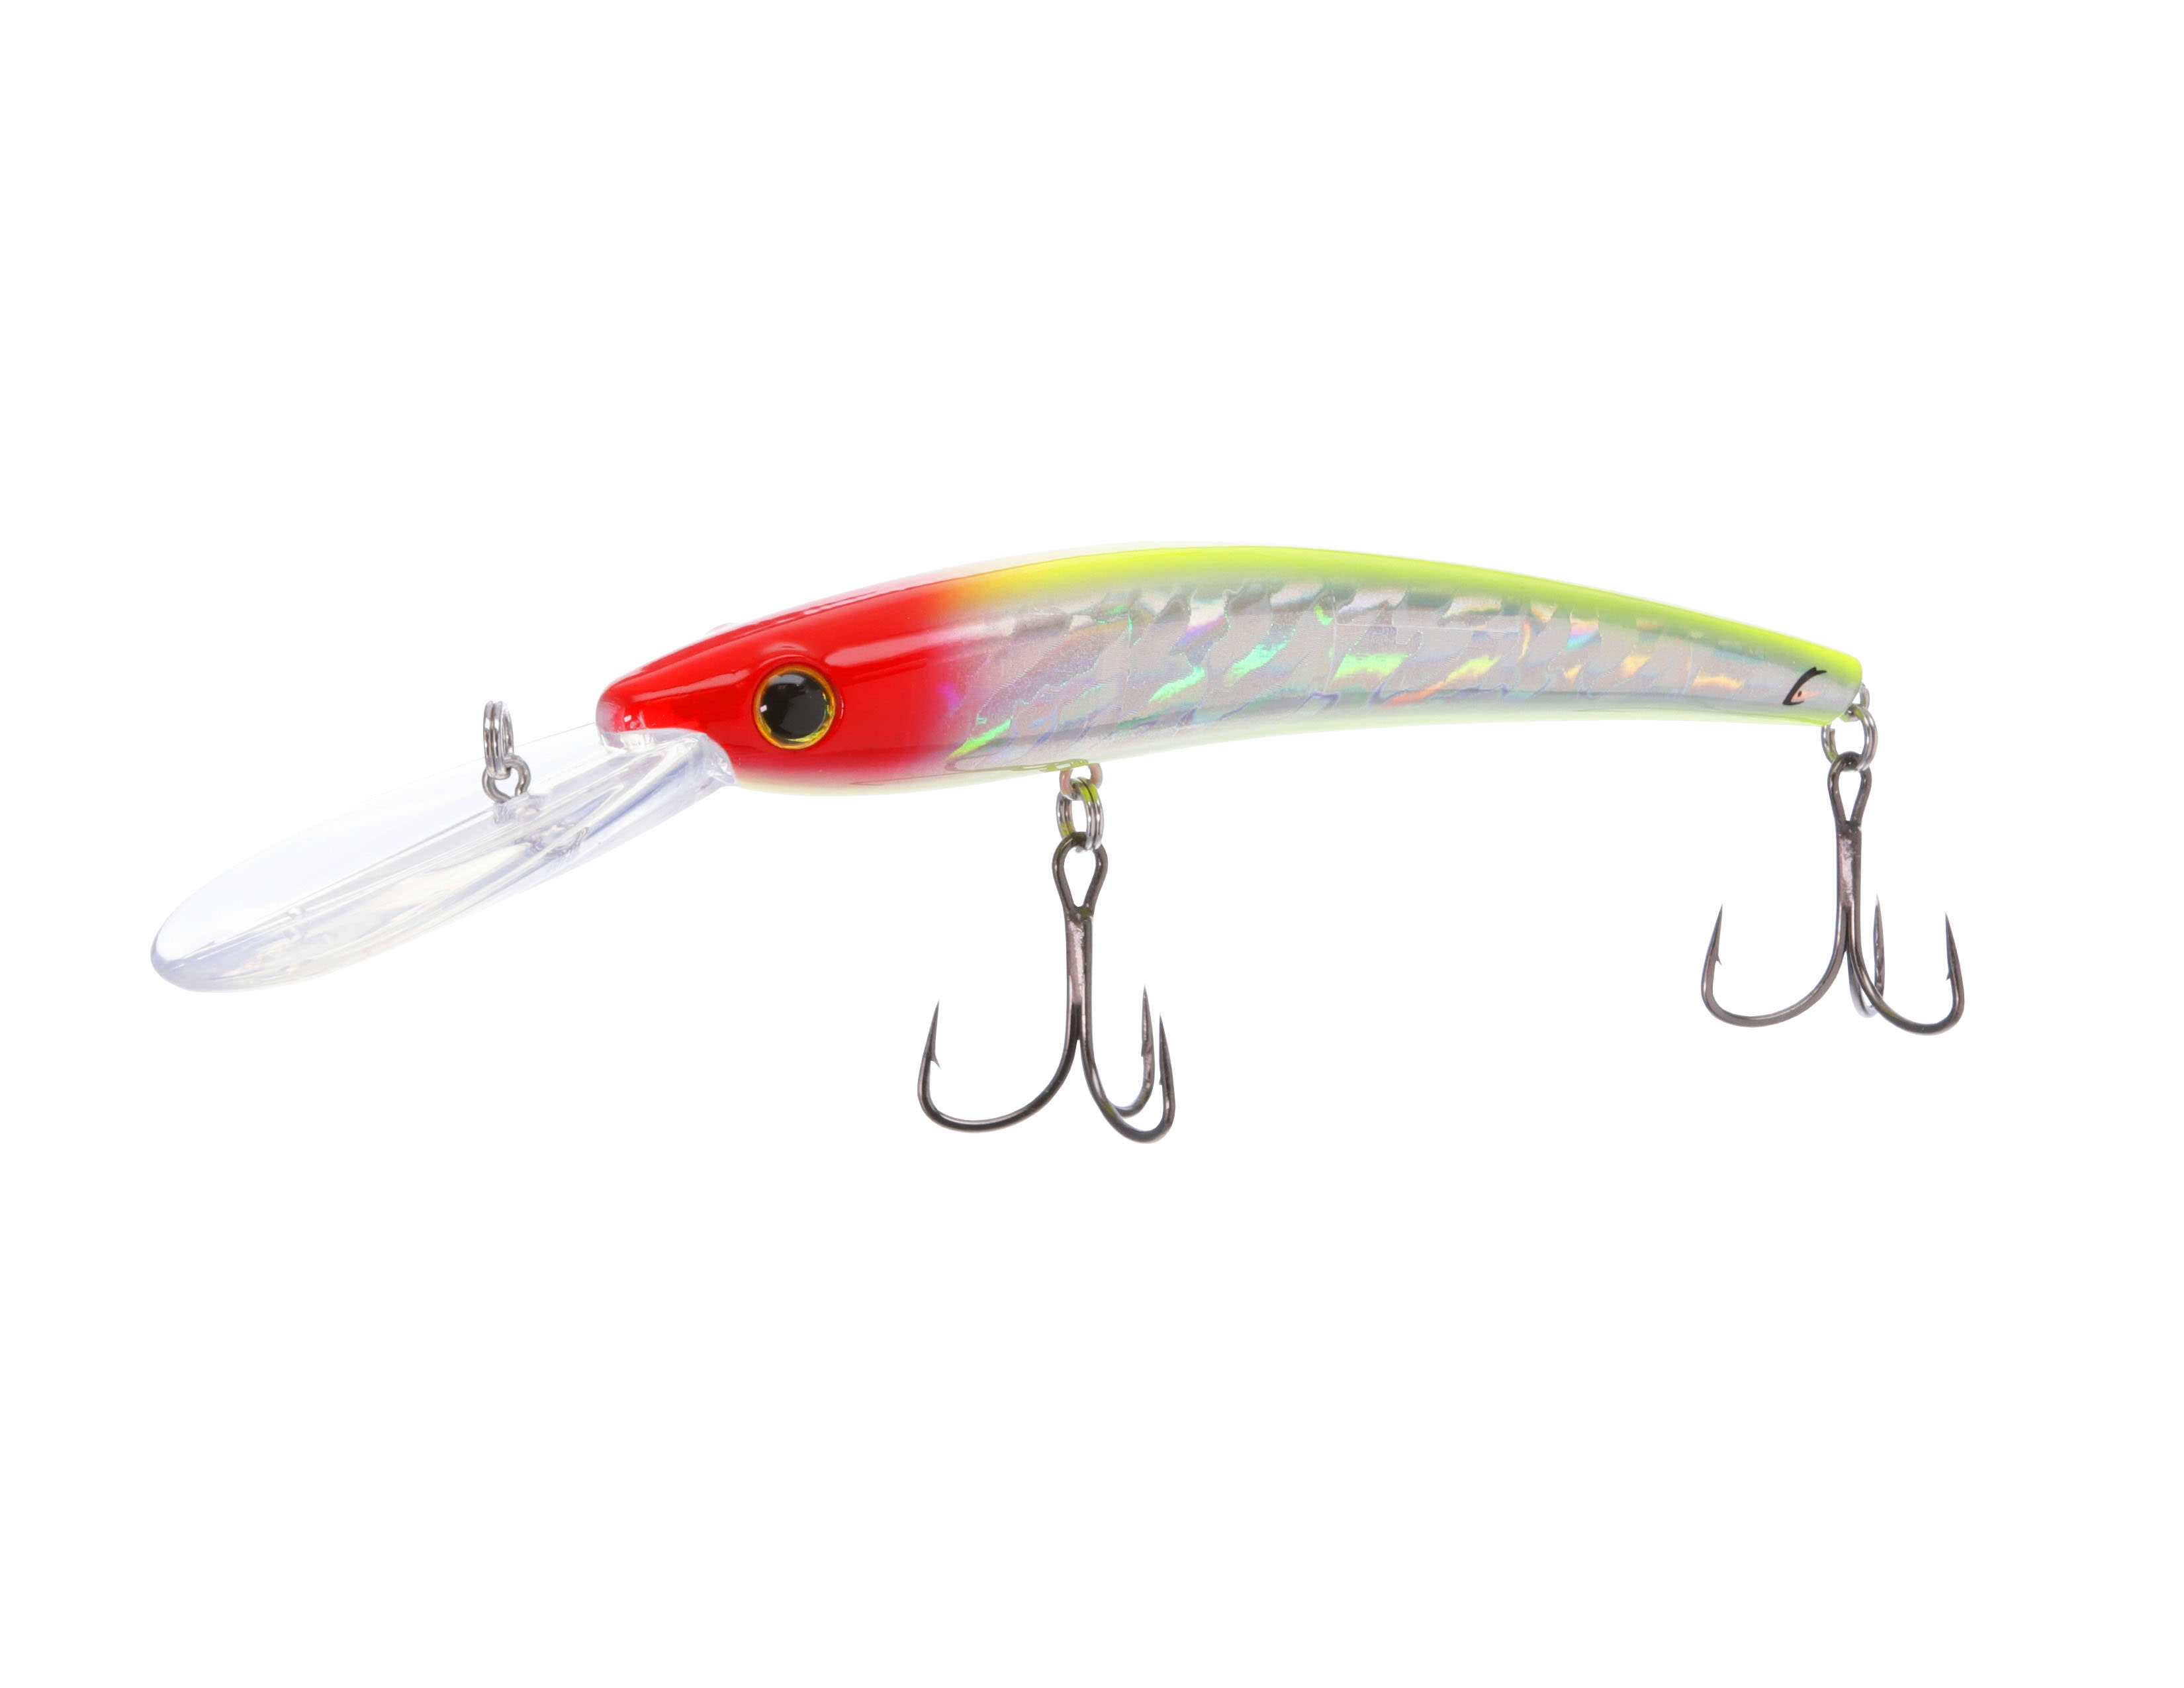 Wally Diver CD6 Swimbait - 3 ⅛'' - Cotton Cordell